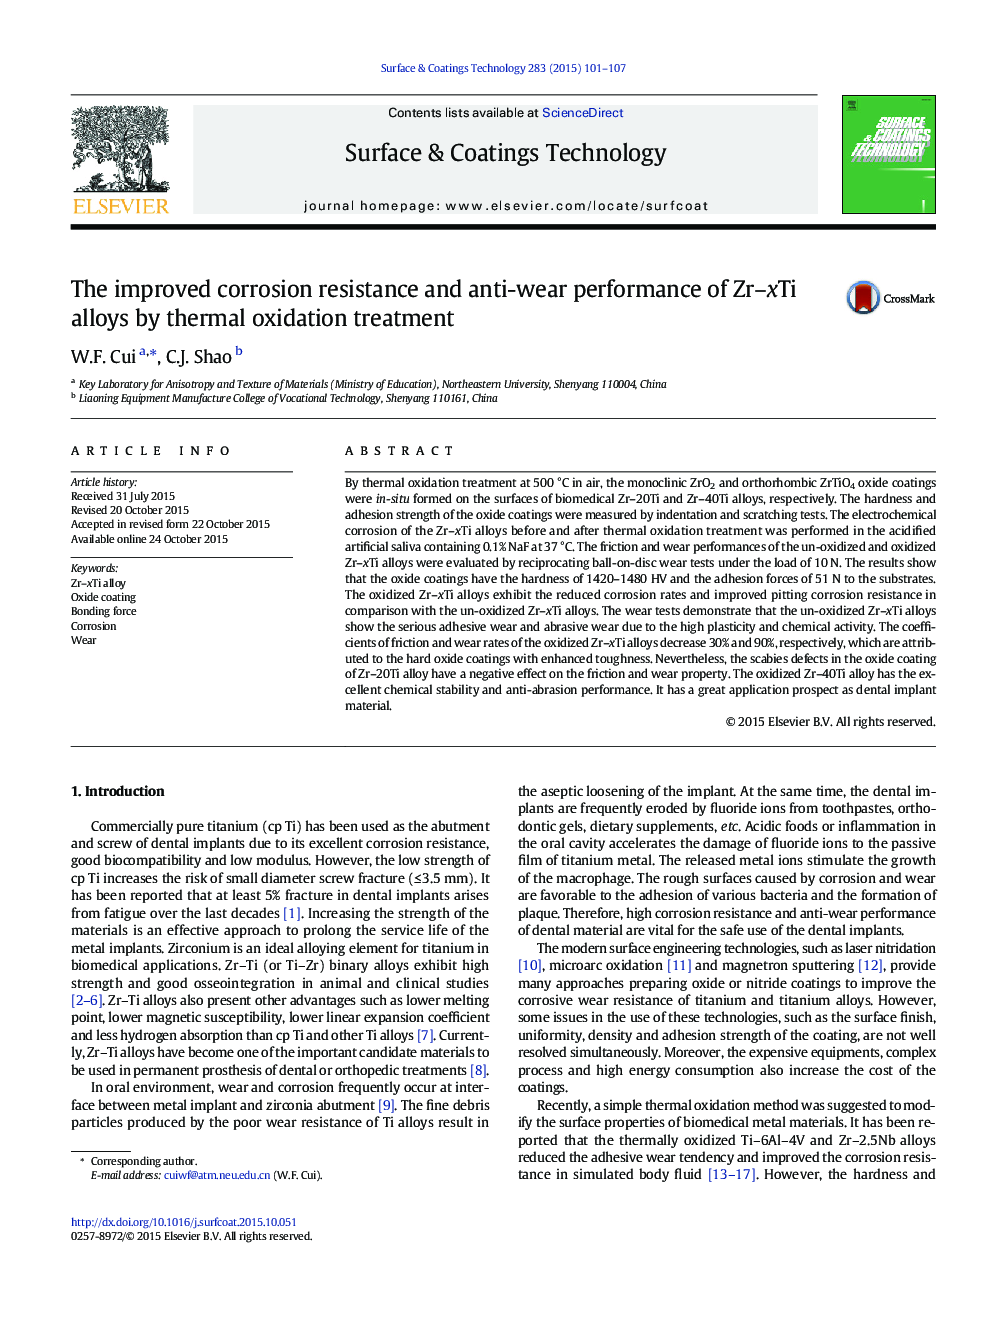 The improved corrosion resistance and anti-wear performance of Zr-xTi alloys by thermal oxidation treatment